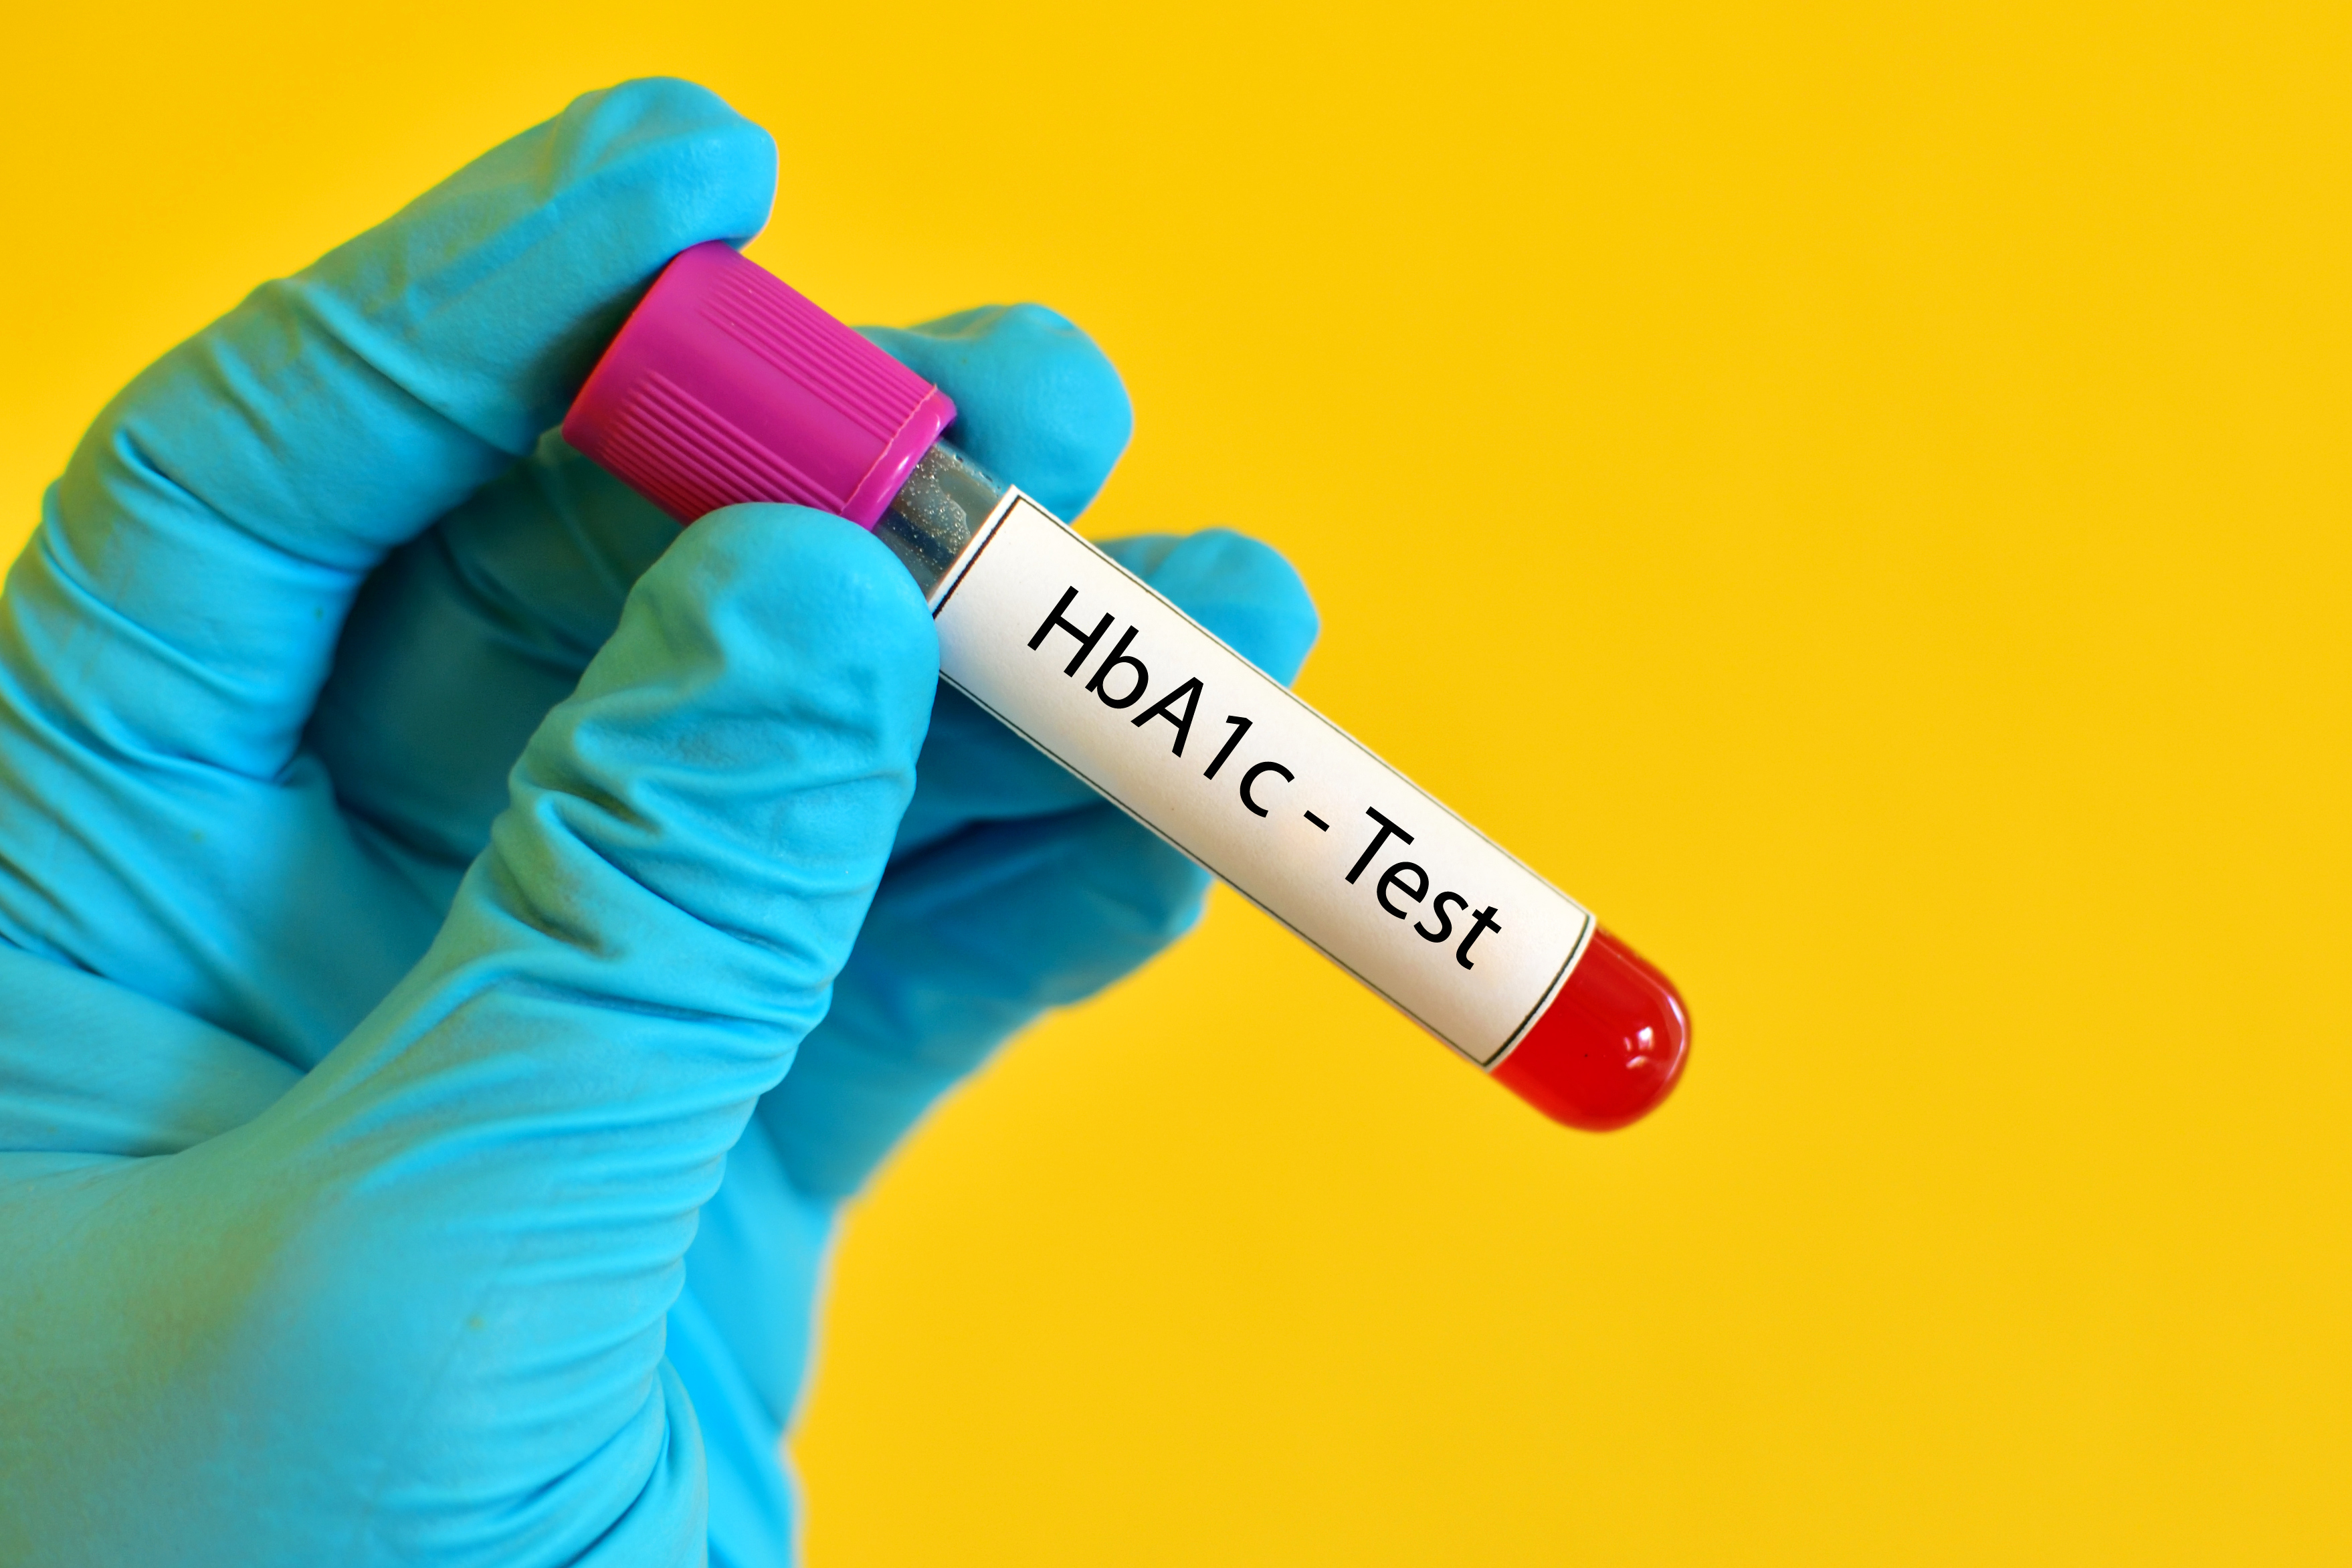 Test tube with blood for HbA1c test